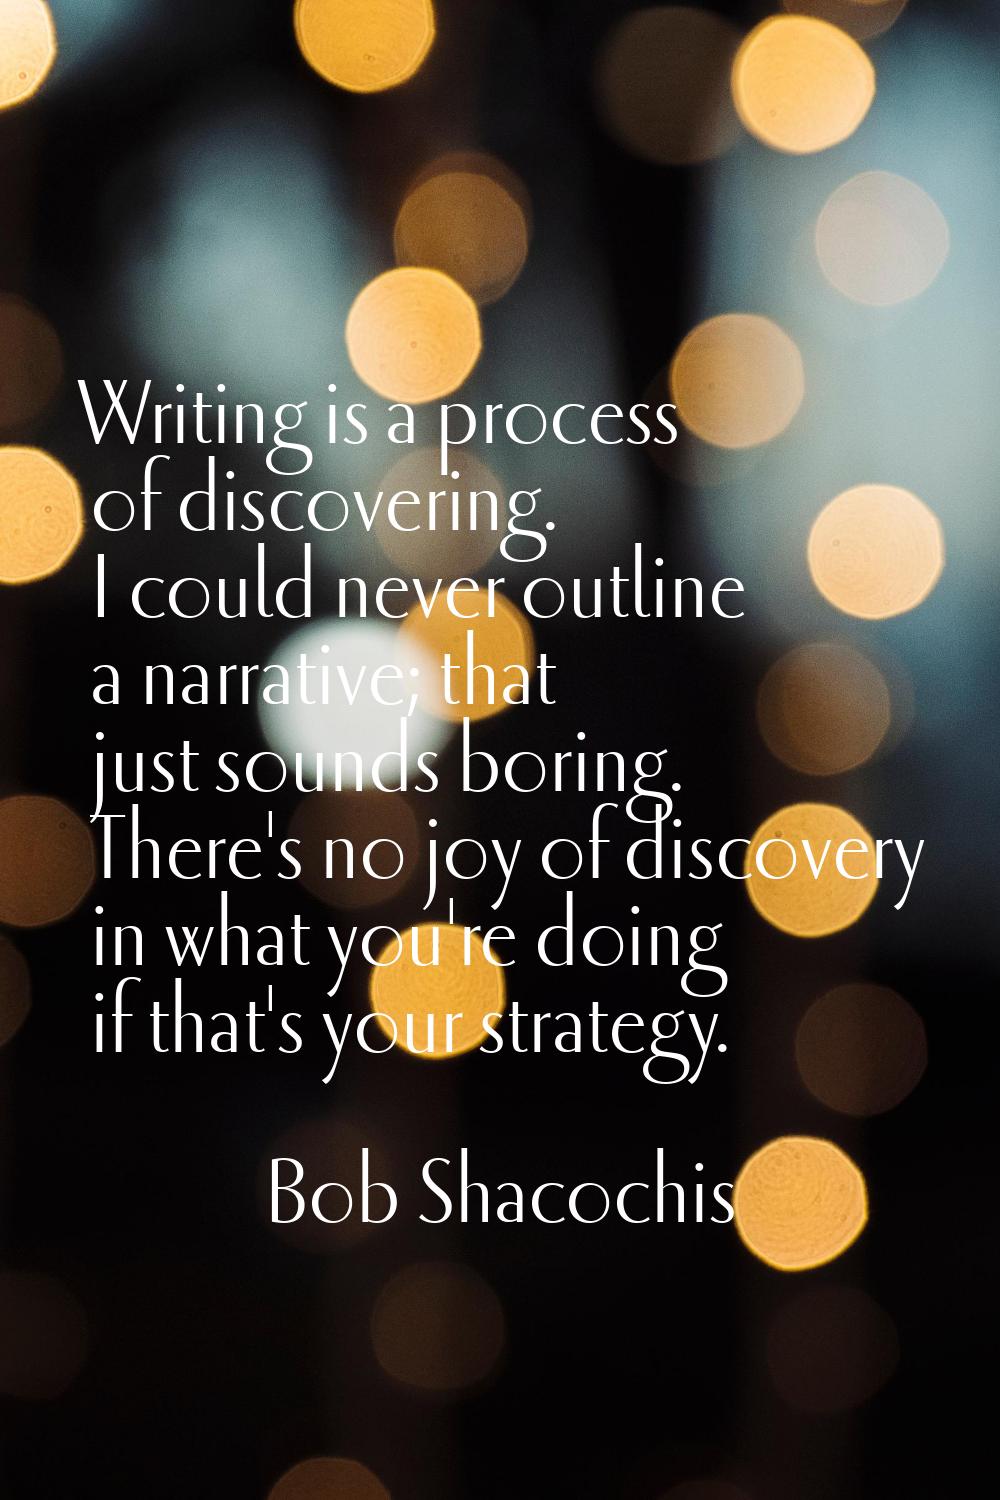 Writing is a process of discovering. I could never outline a narrative; that just sounds boring. Th